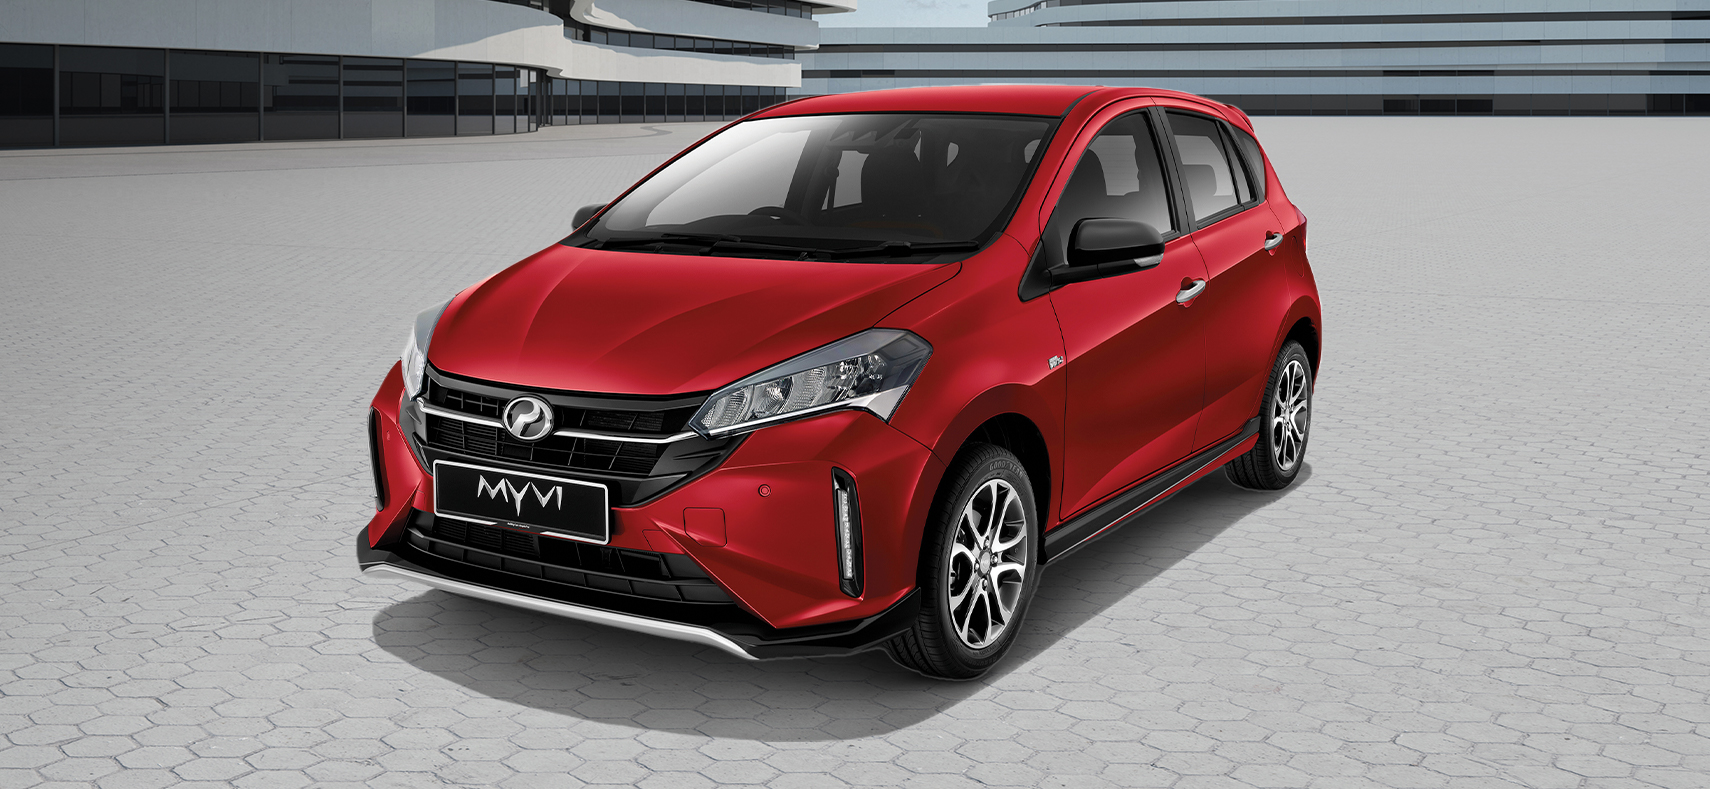 Her mother claims that Perodya Myvi cars are meant for students, and finds them 'low class'. Source: Perodua Malaysia